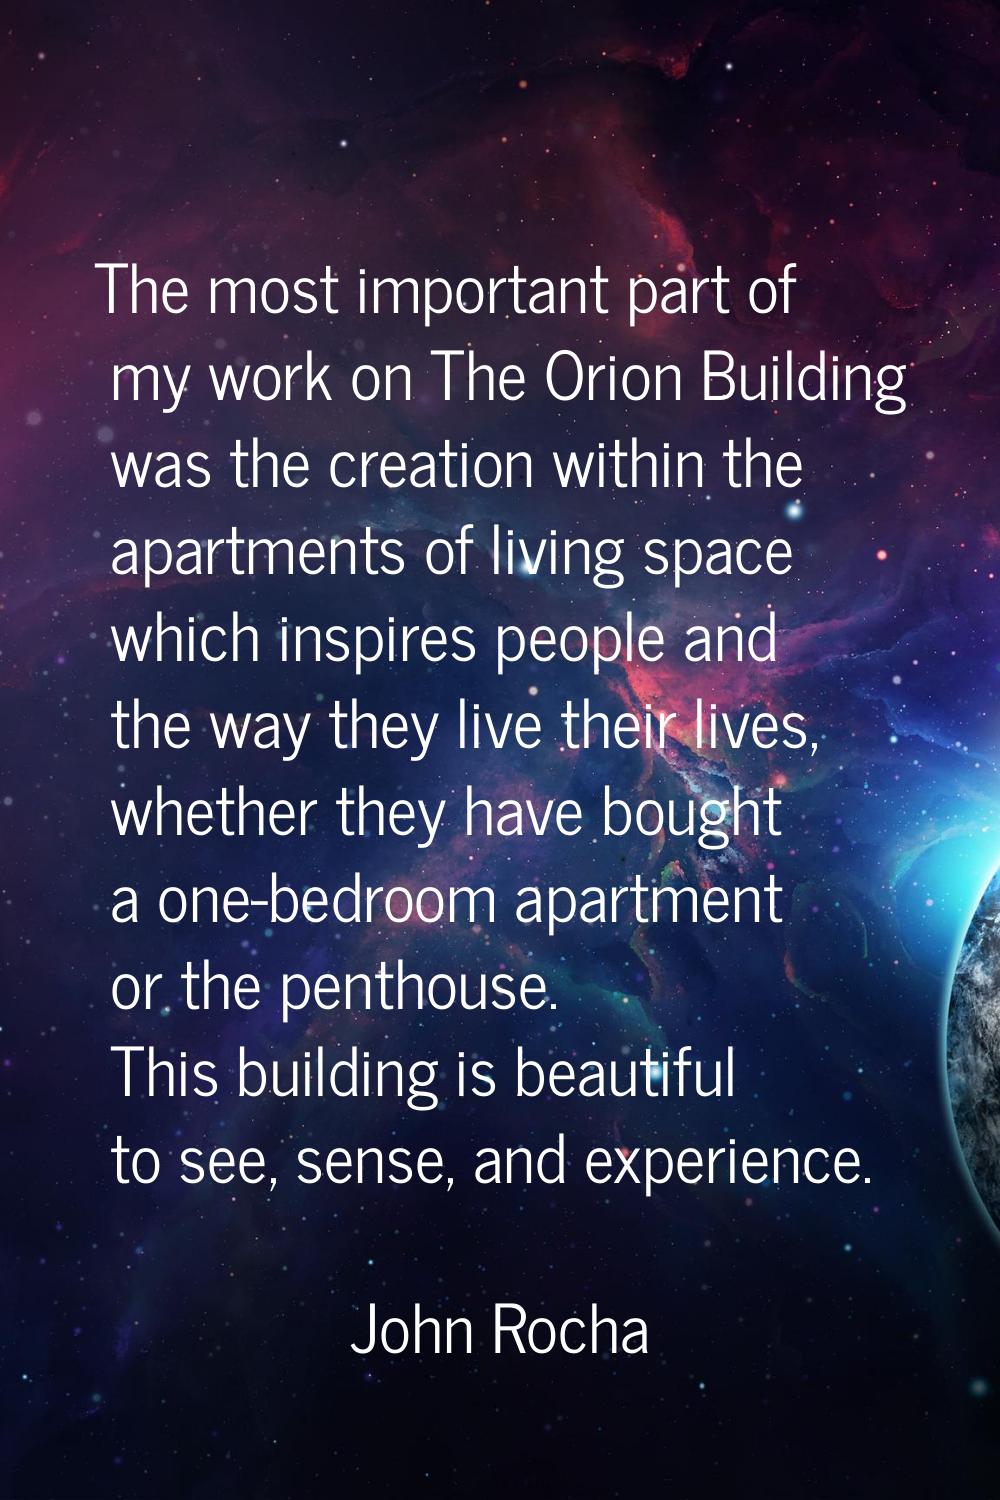 The most important part of my work on The Orion Building was the creation within the apartments of 